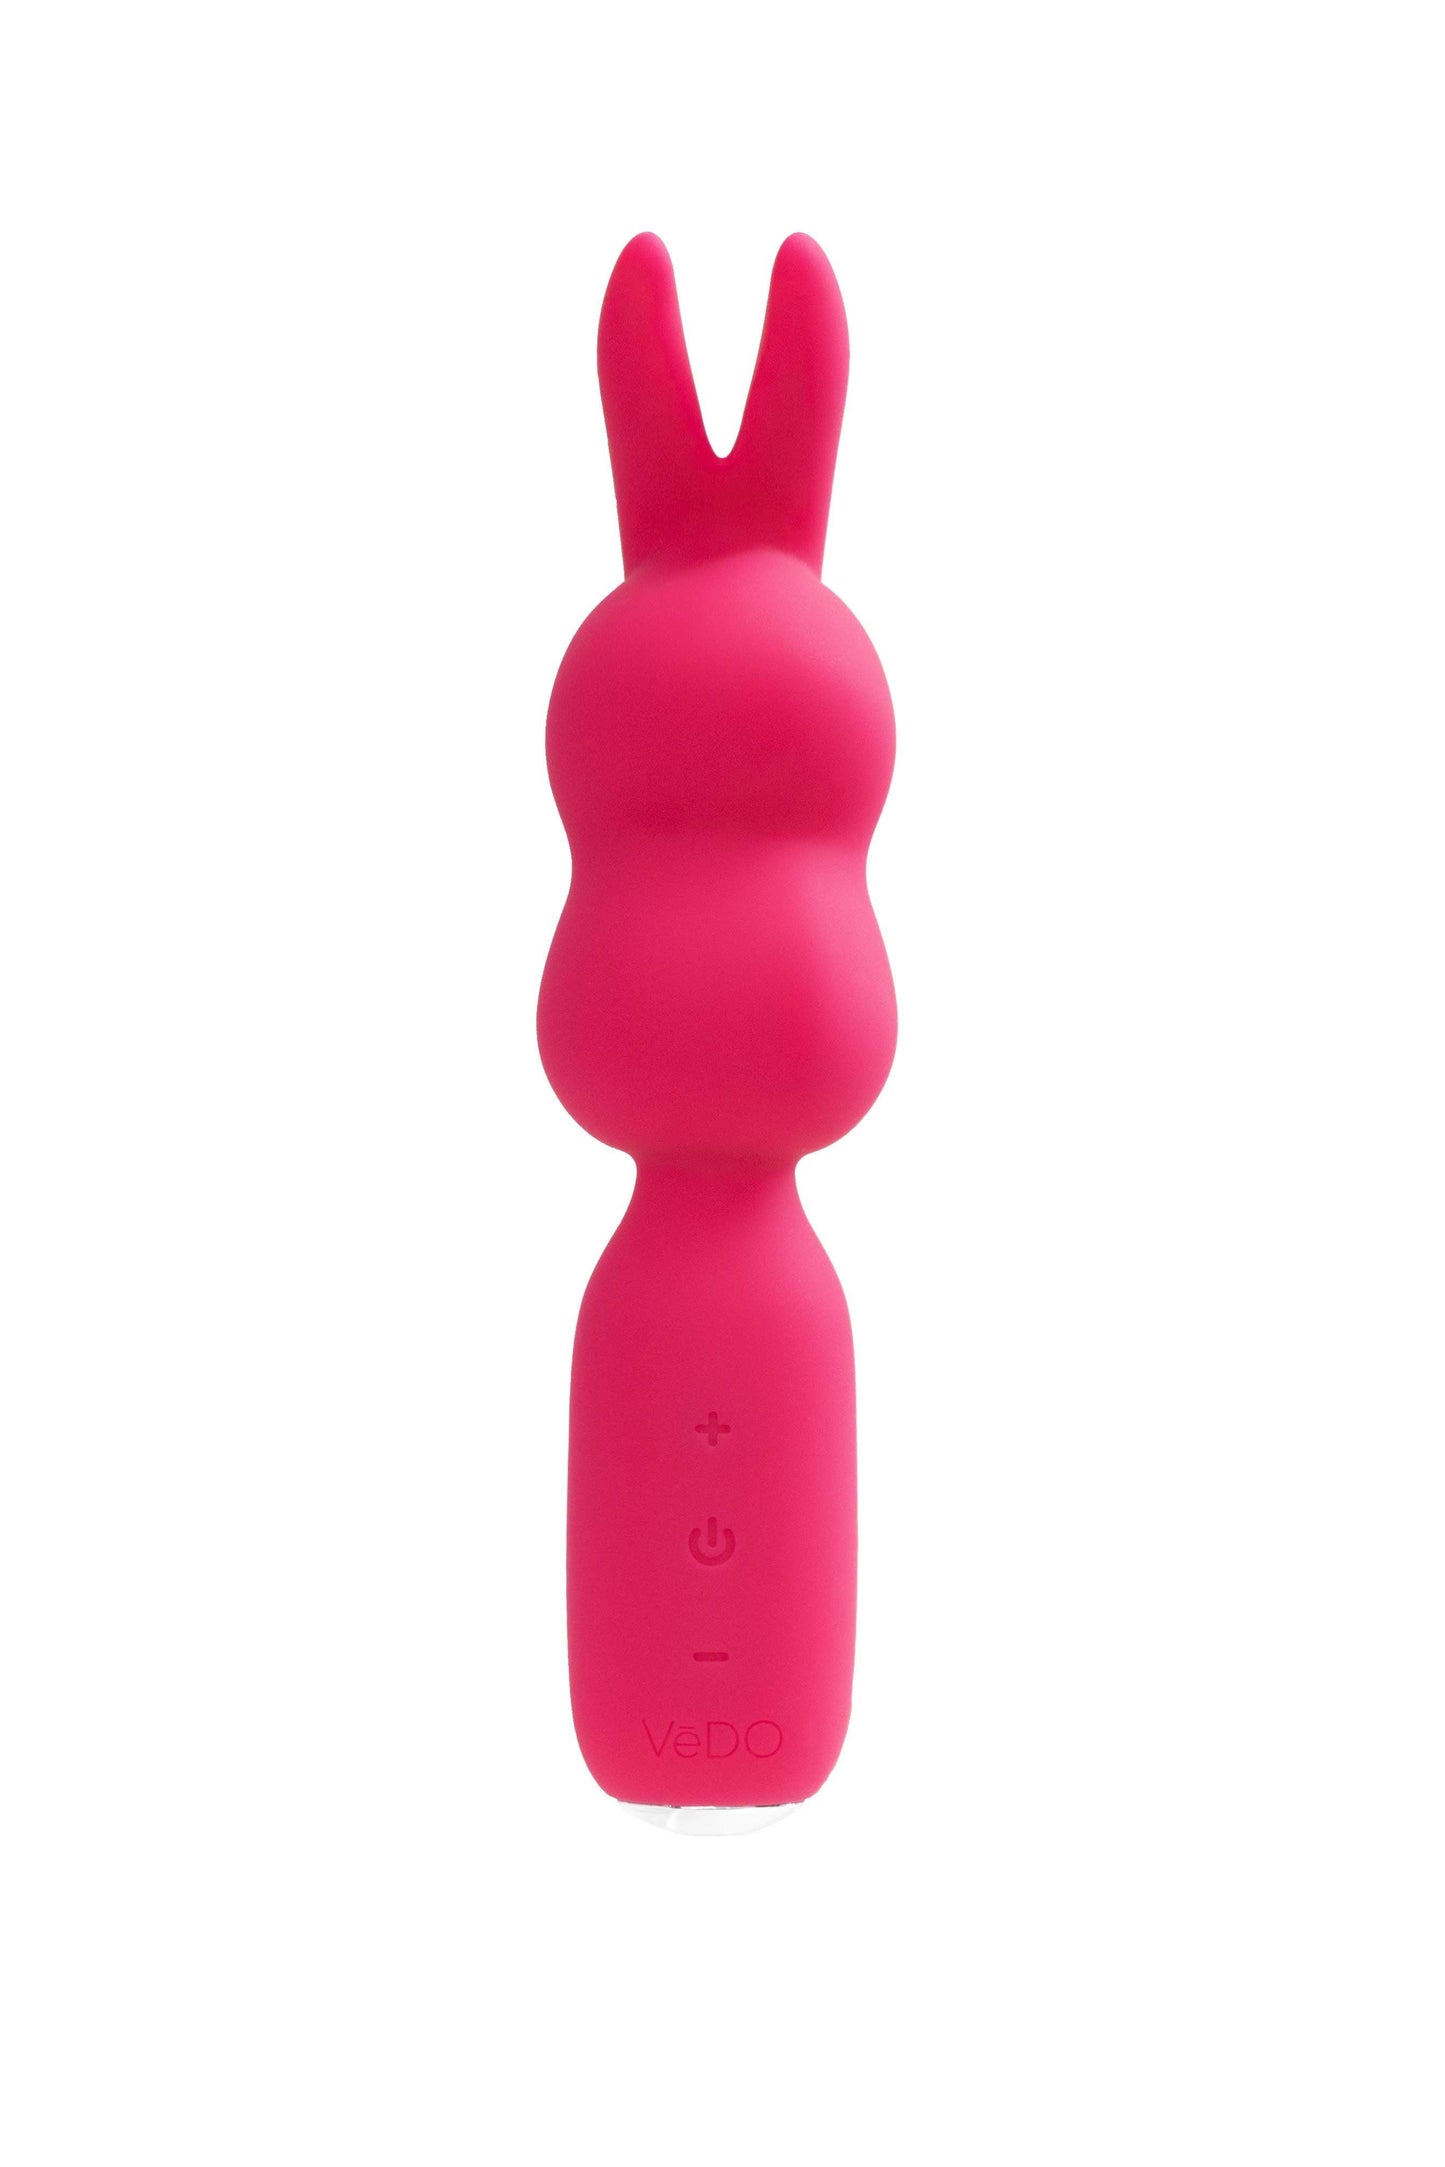 Hopper Bunny Rechargeable Mini Wand - Pretty in Pink - My Sex Toy Hub